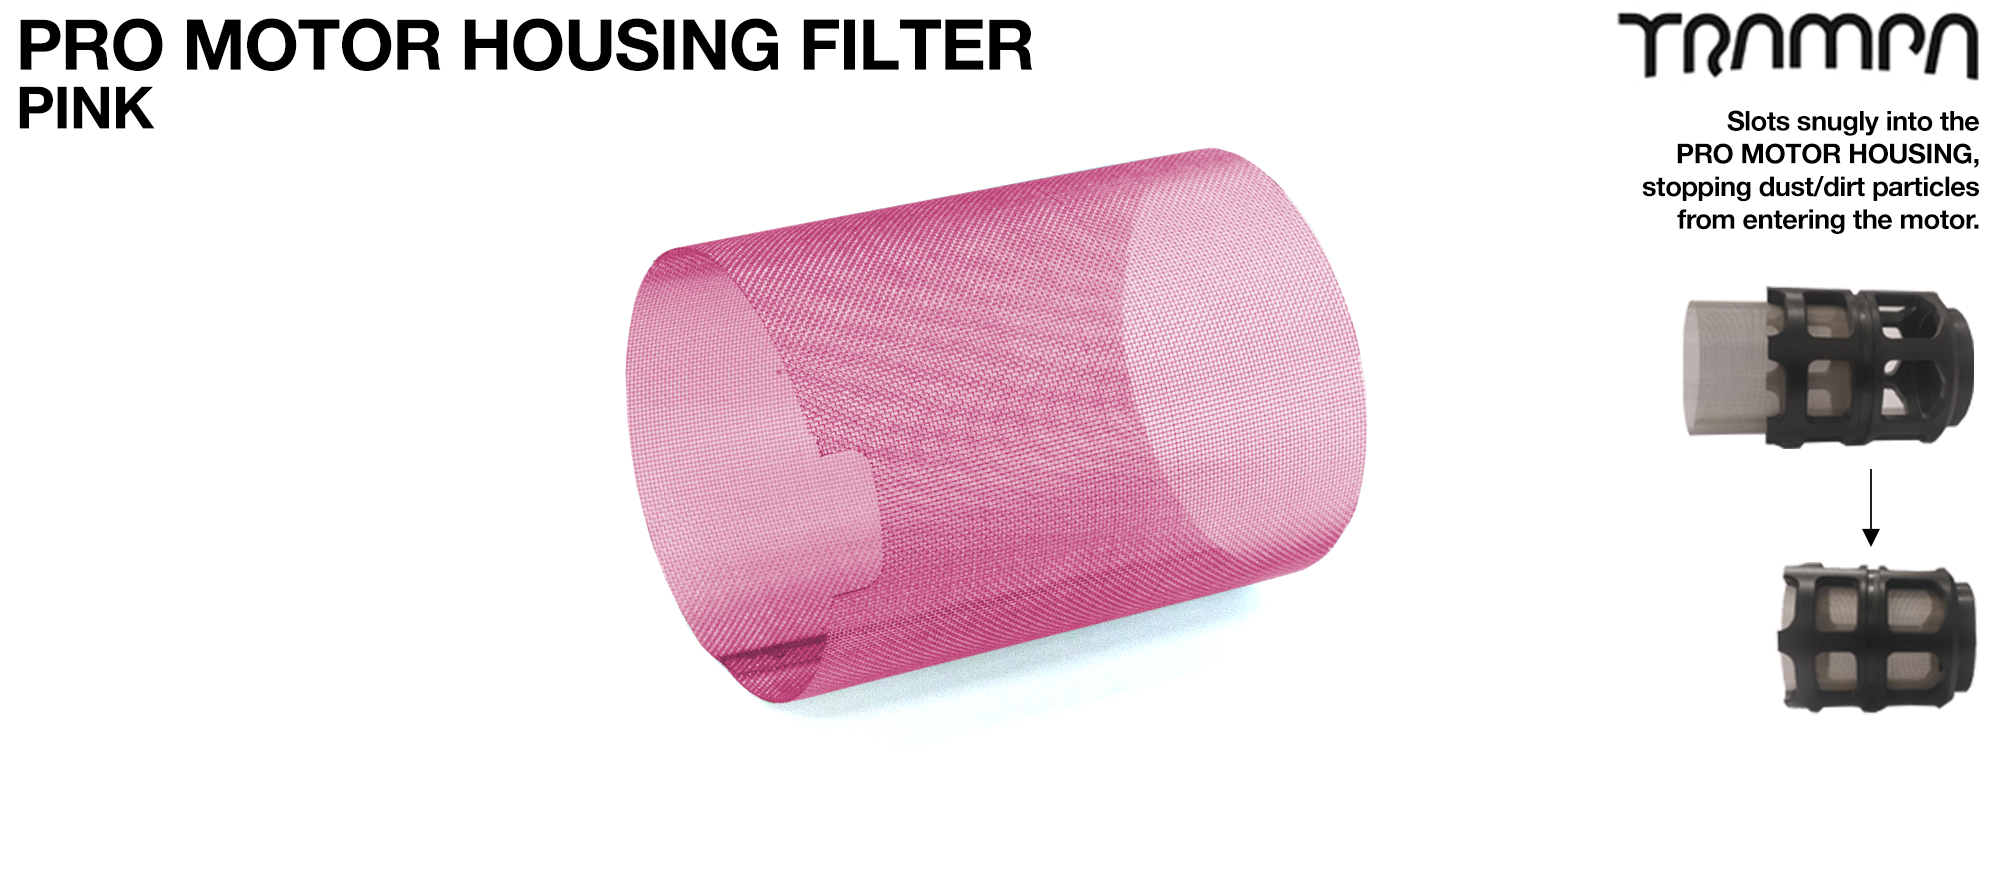 MkII FULL Motor Protection Cover & MESH FILTER - PINK